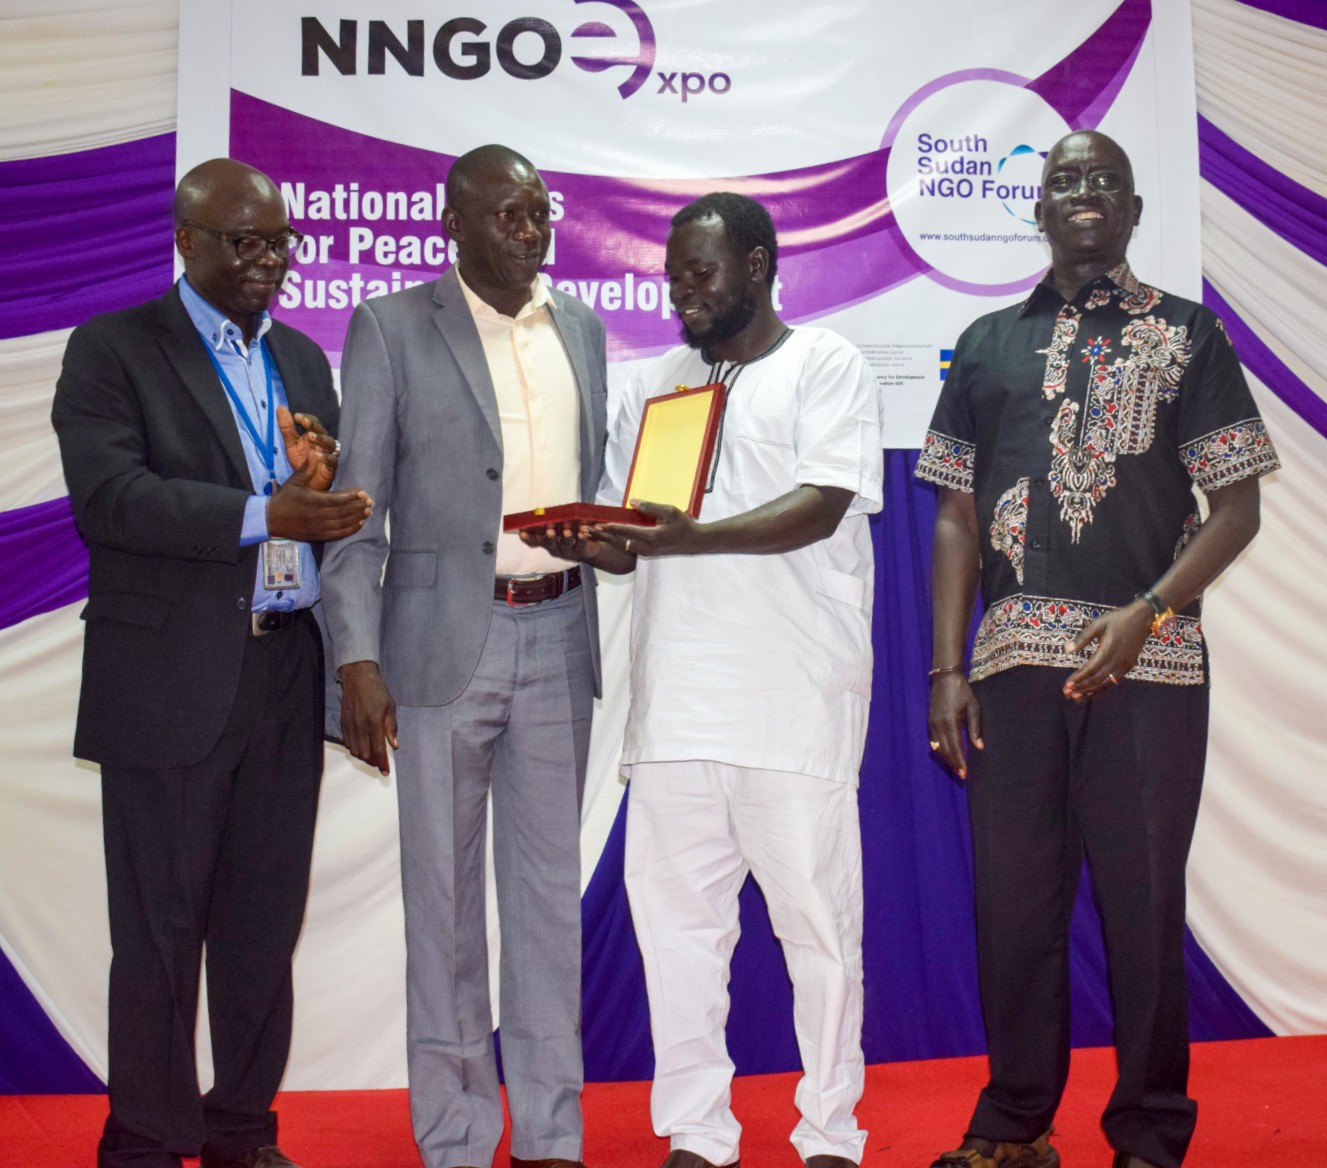 LCED awarded for “Most Courageous Initiative” in South Sudan